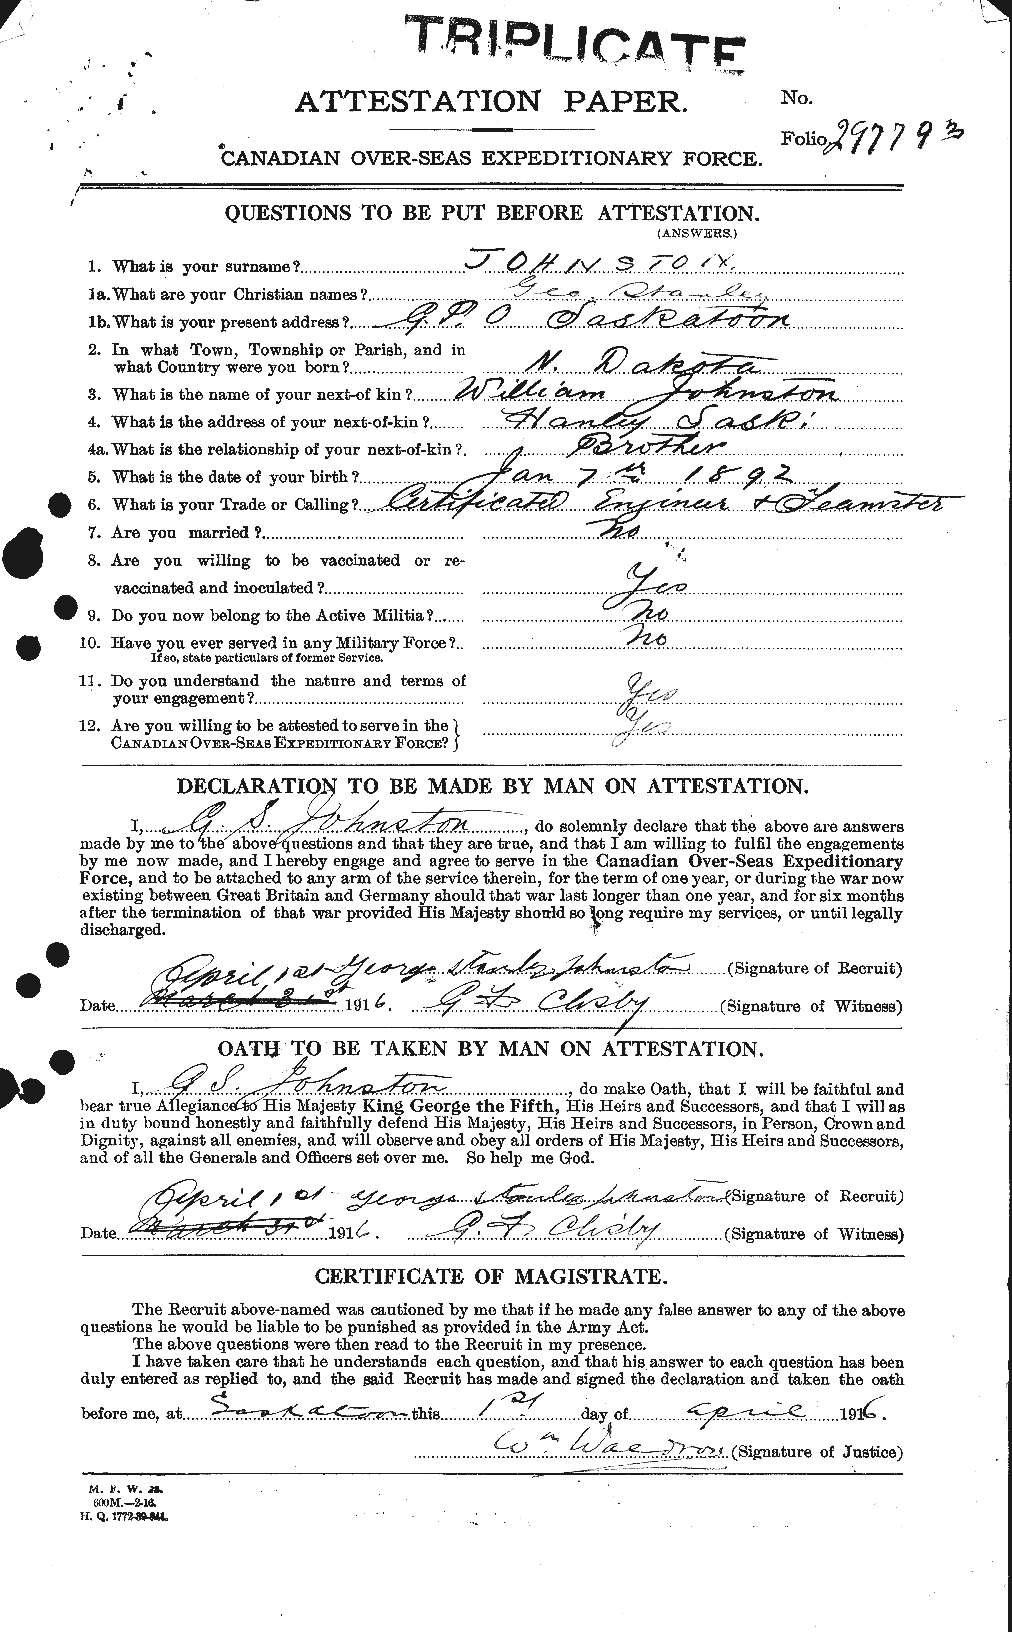 Personnel Records of the First World War - CEF 419445a